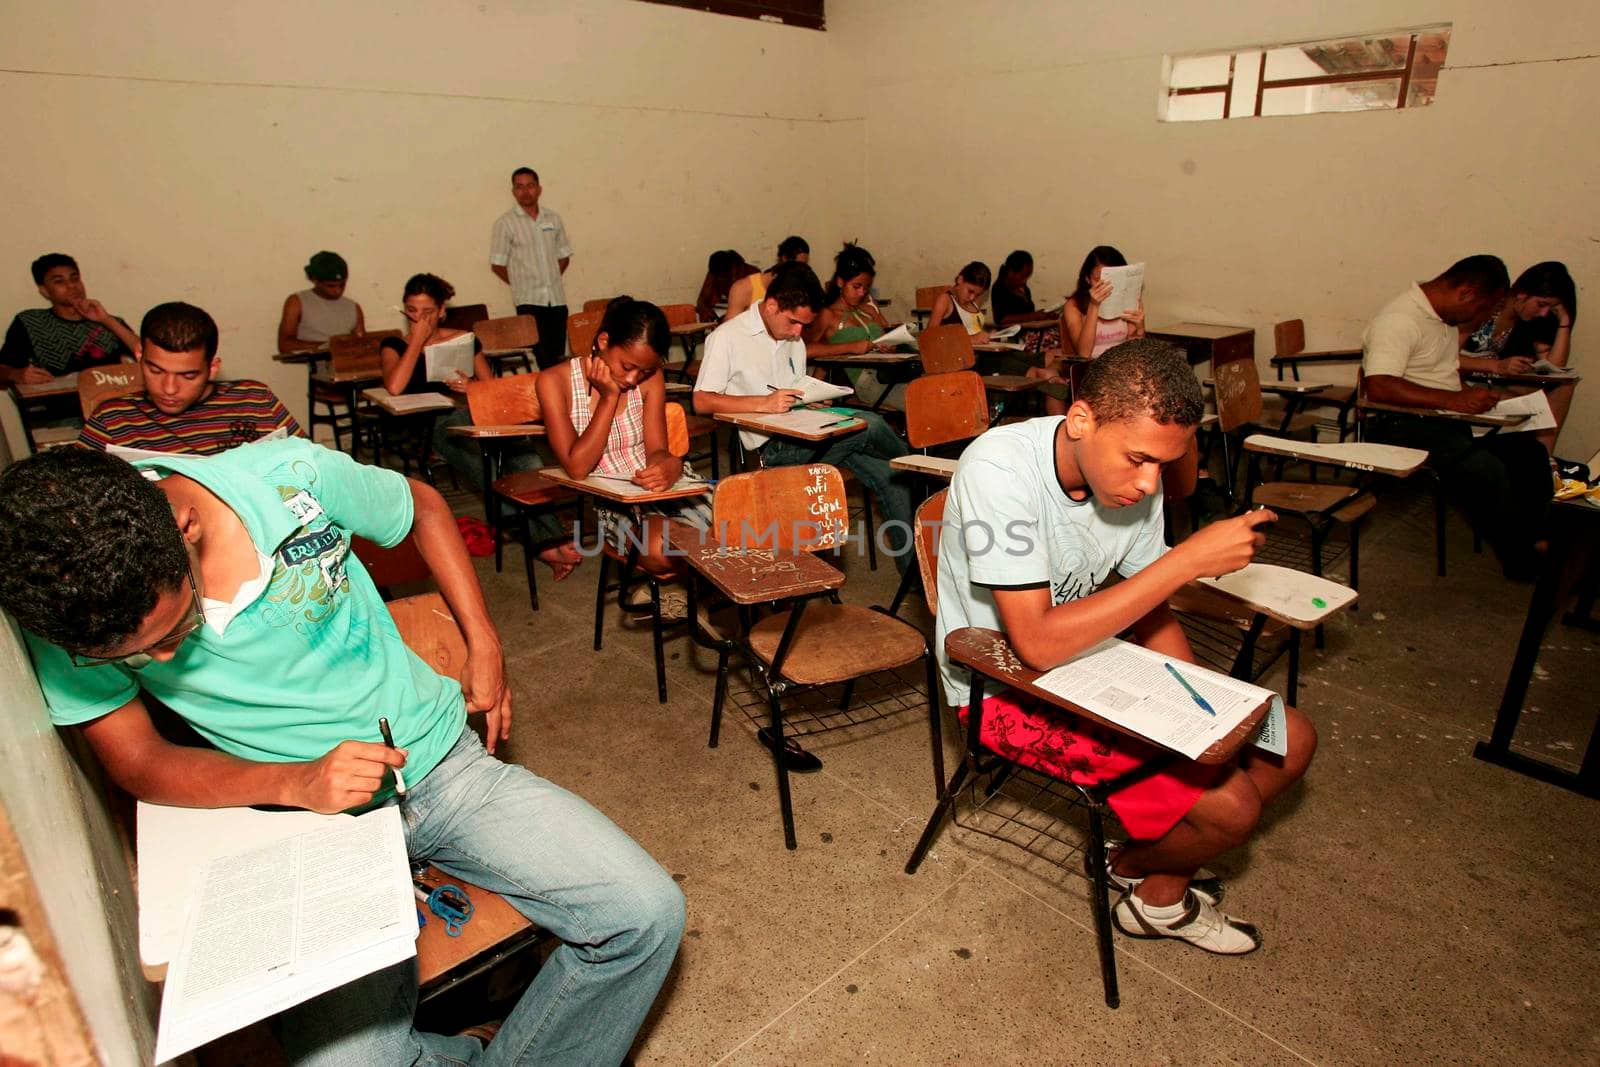 eunapolis, bahia / brazil - december 6, 2009: people are seen taking exams at the National High School Exam - Enem - in the city of Eunapols.